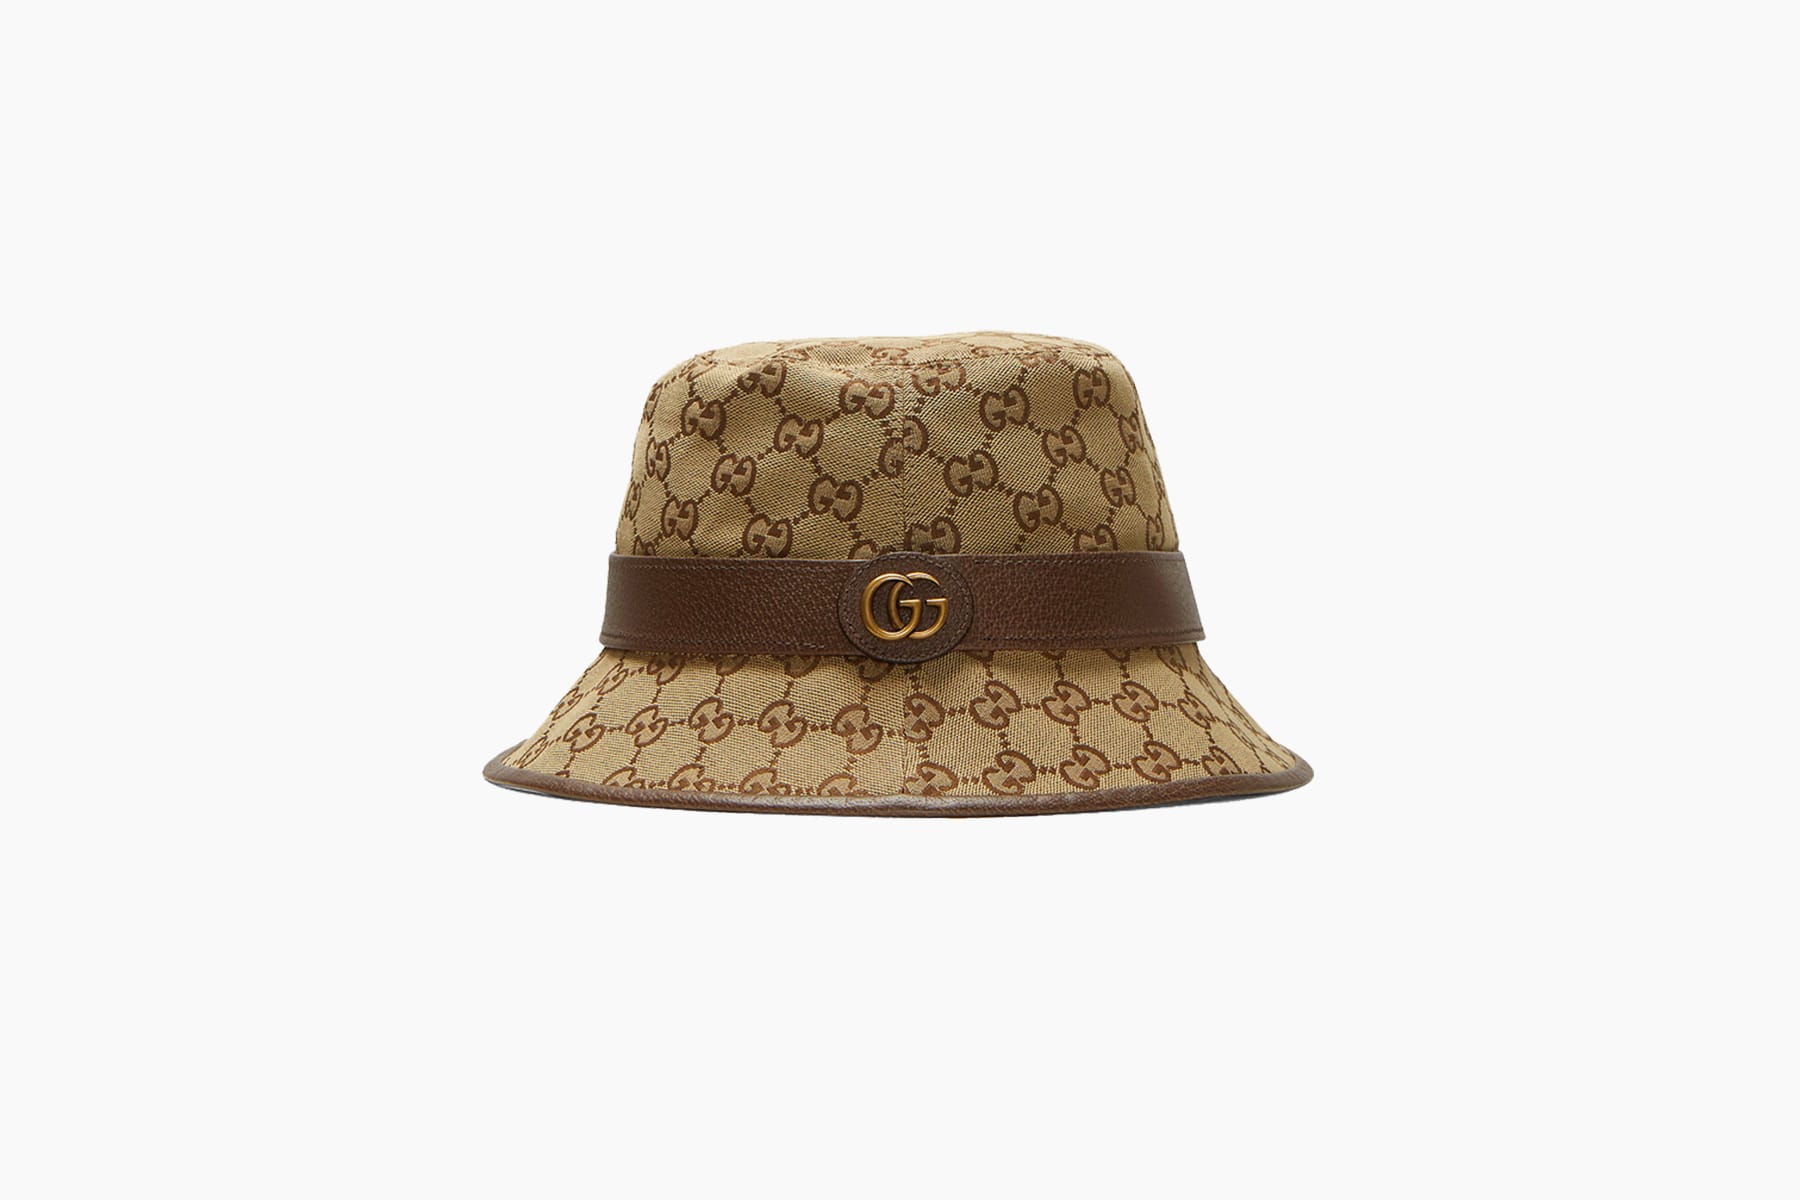 Gucci Bucket Hat Top Sellers, 50% OFF | lagence.tv